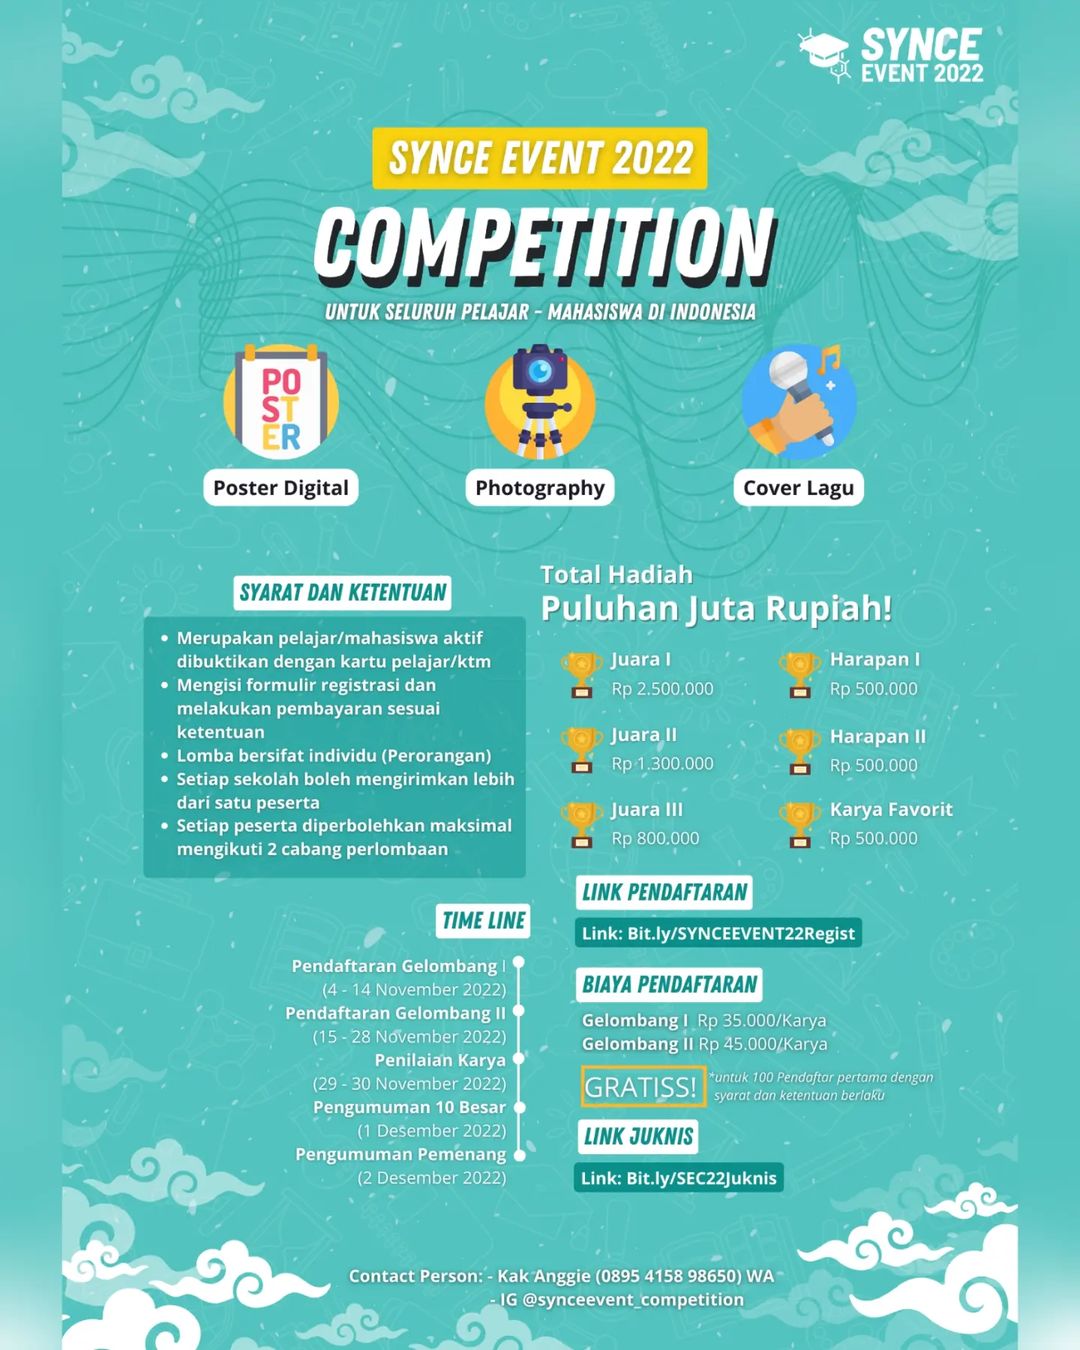 Gratis Synce Event Competition 2022: Lomba Poster, Fotografi dan Cover Lagu